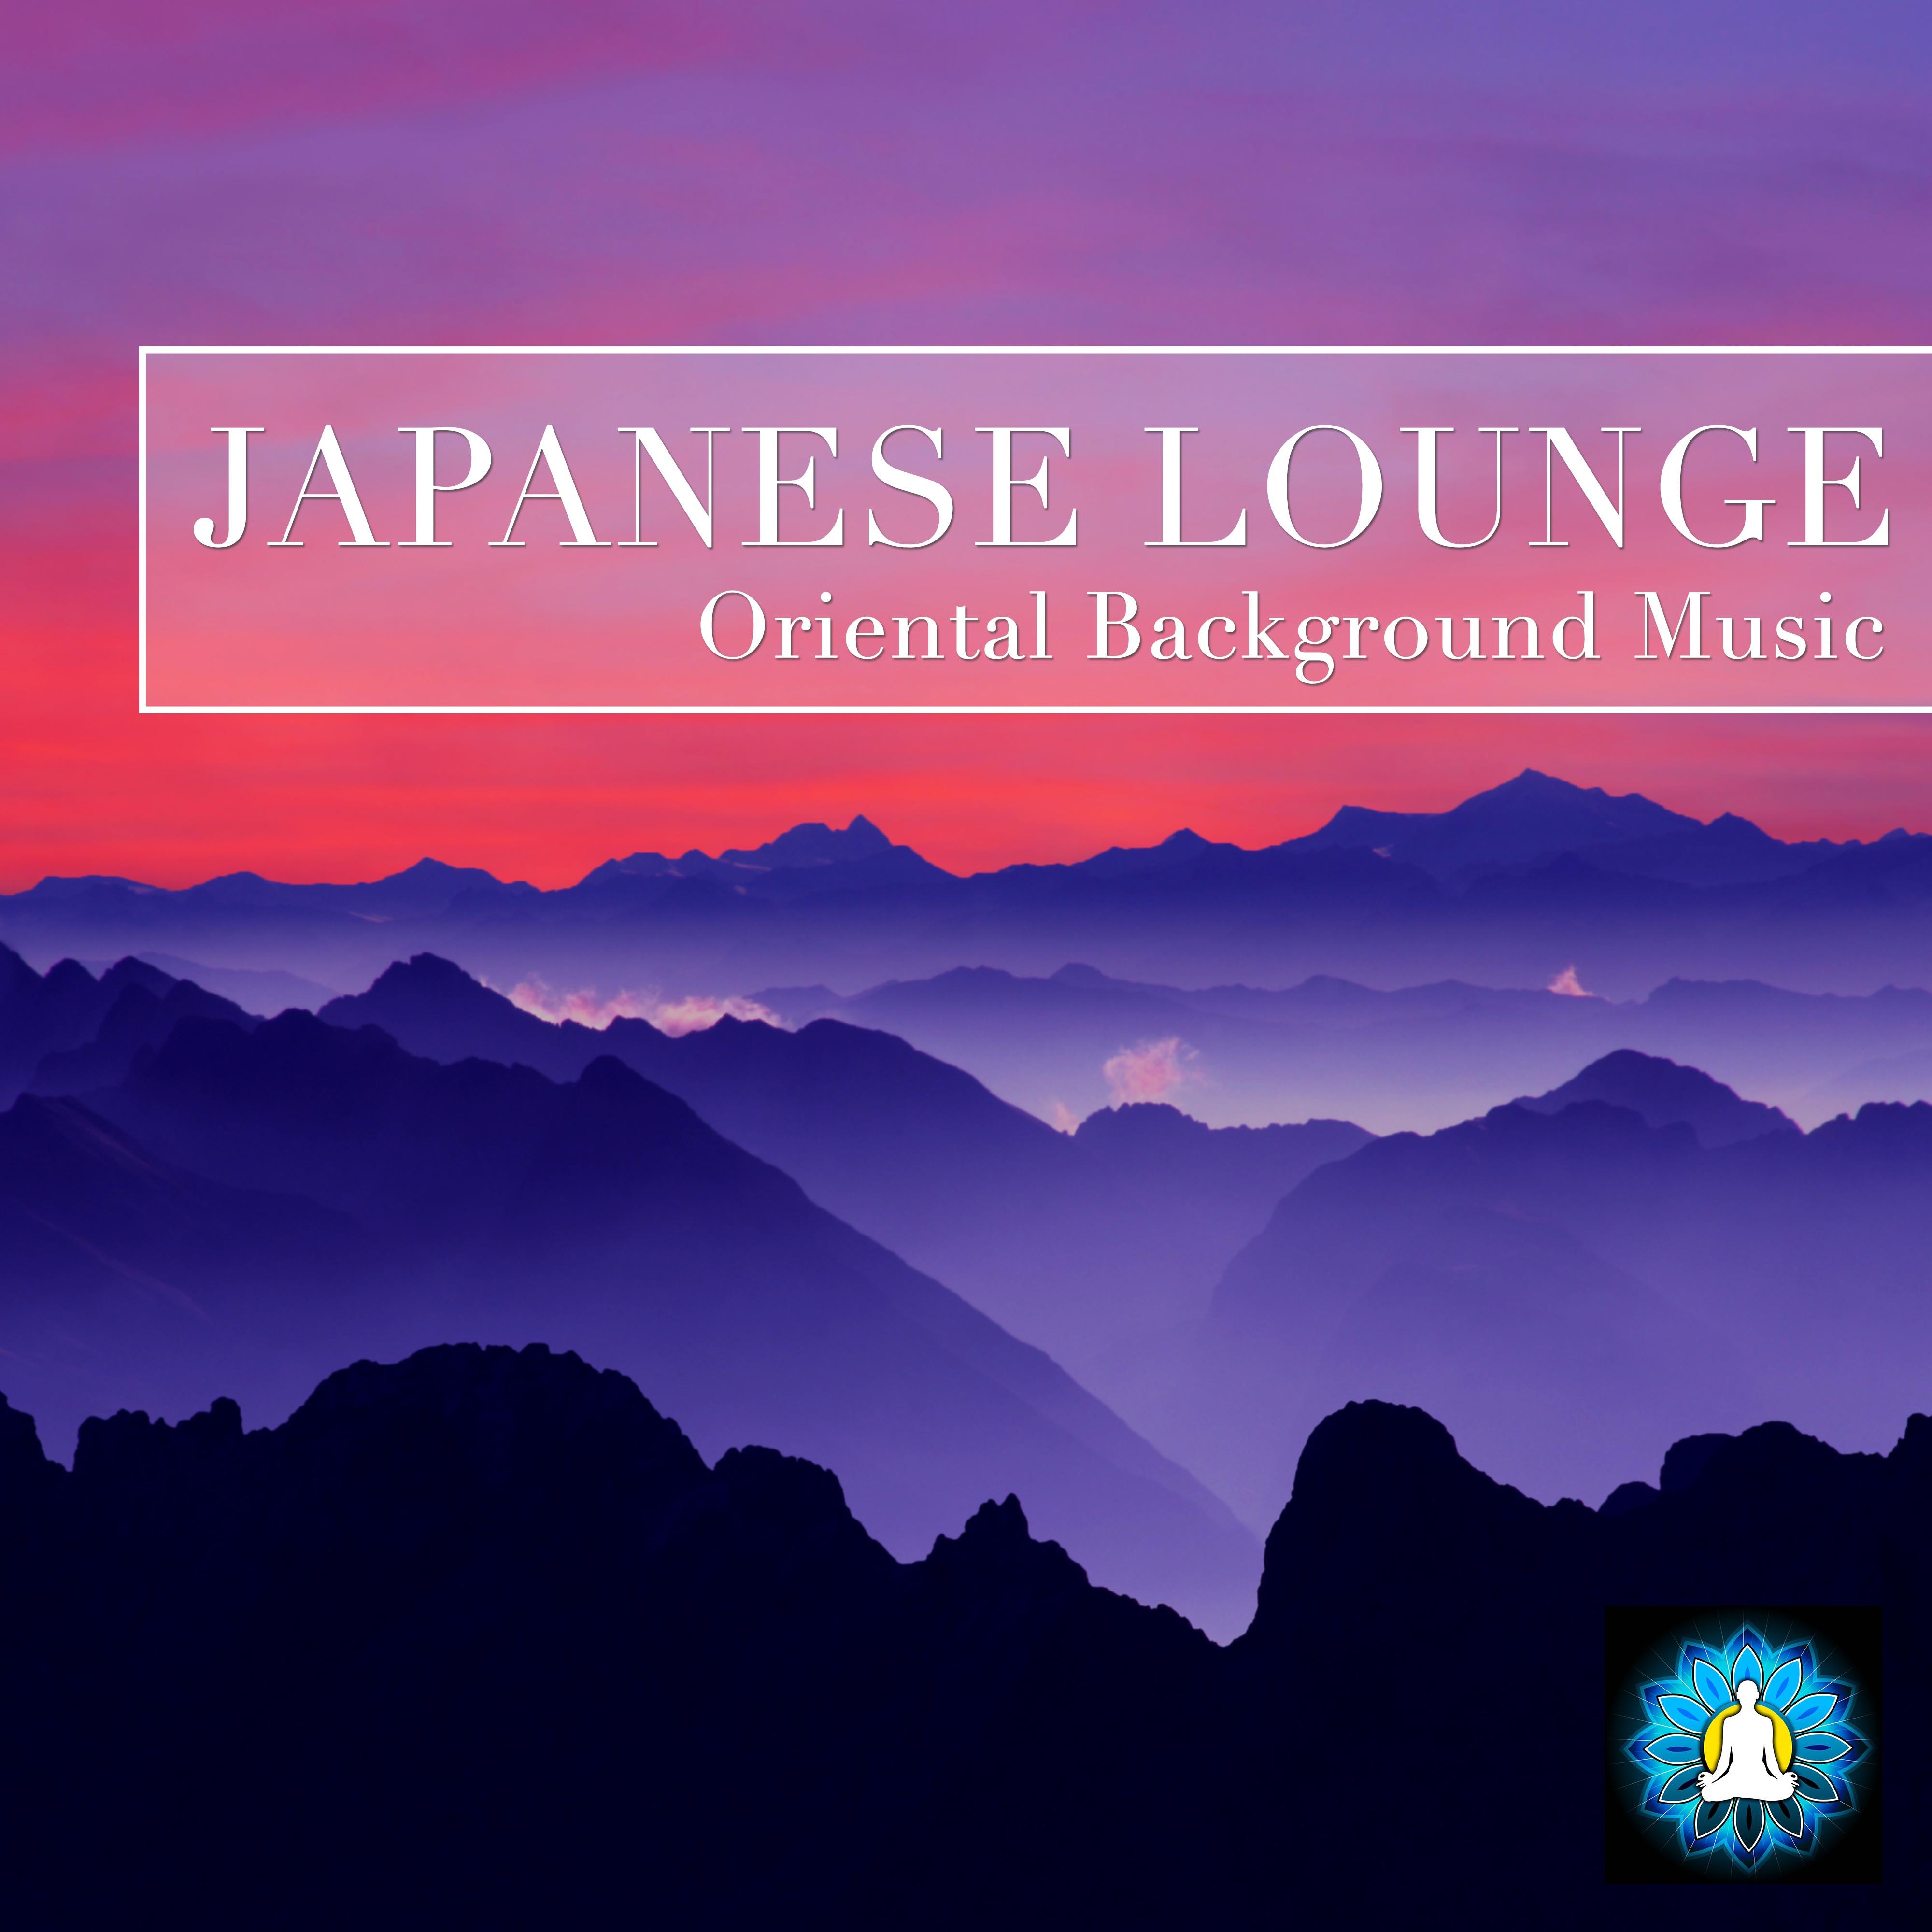 Japanese Lounge - Oriental Background Music for a Relaxed Atmosphere